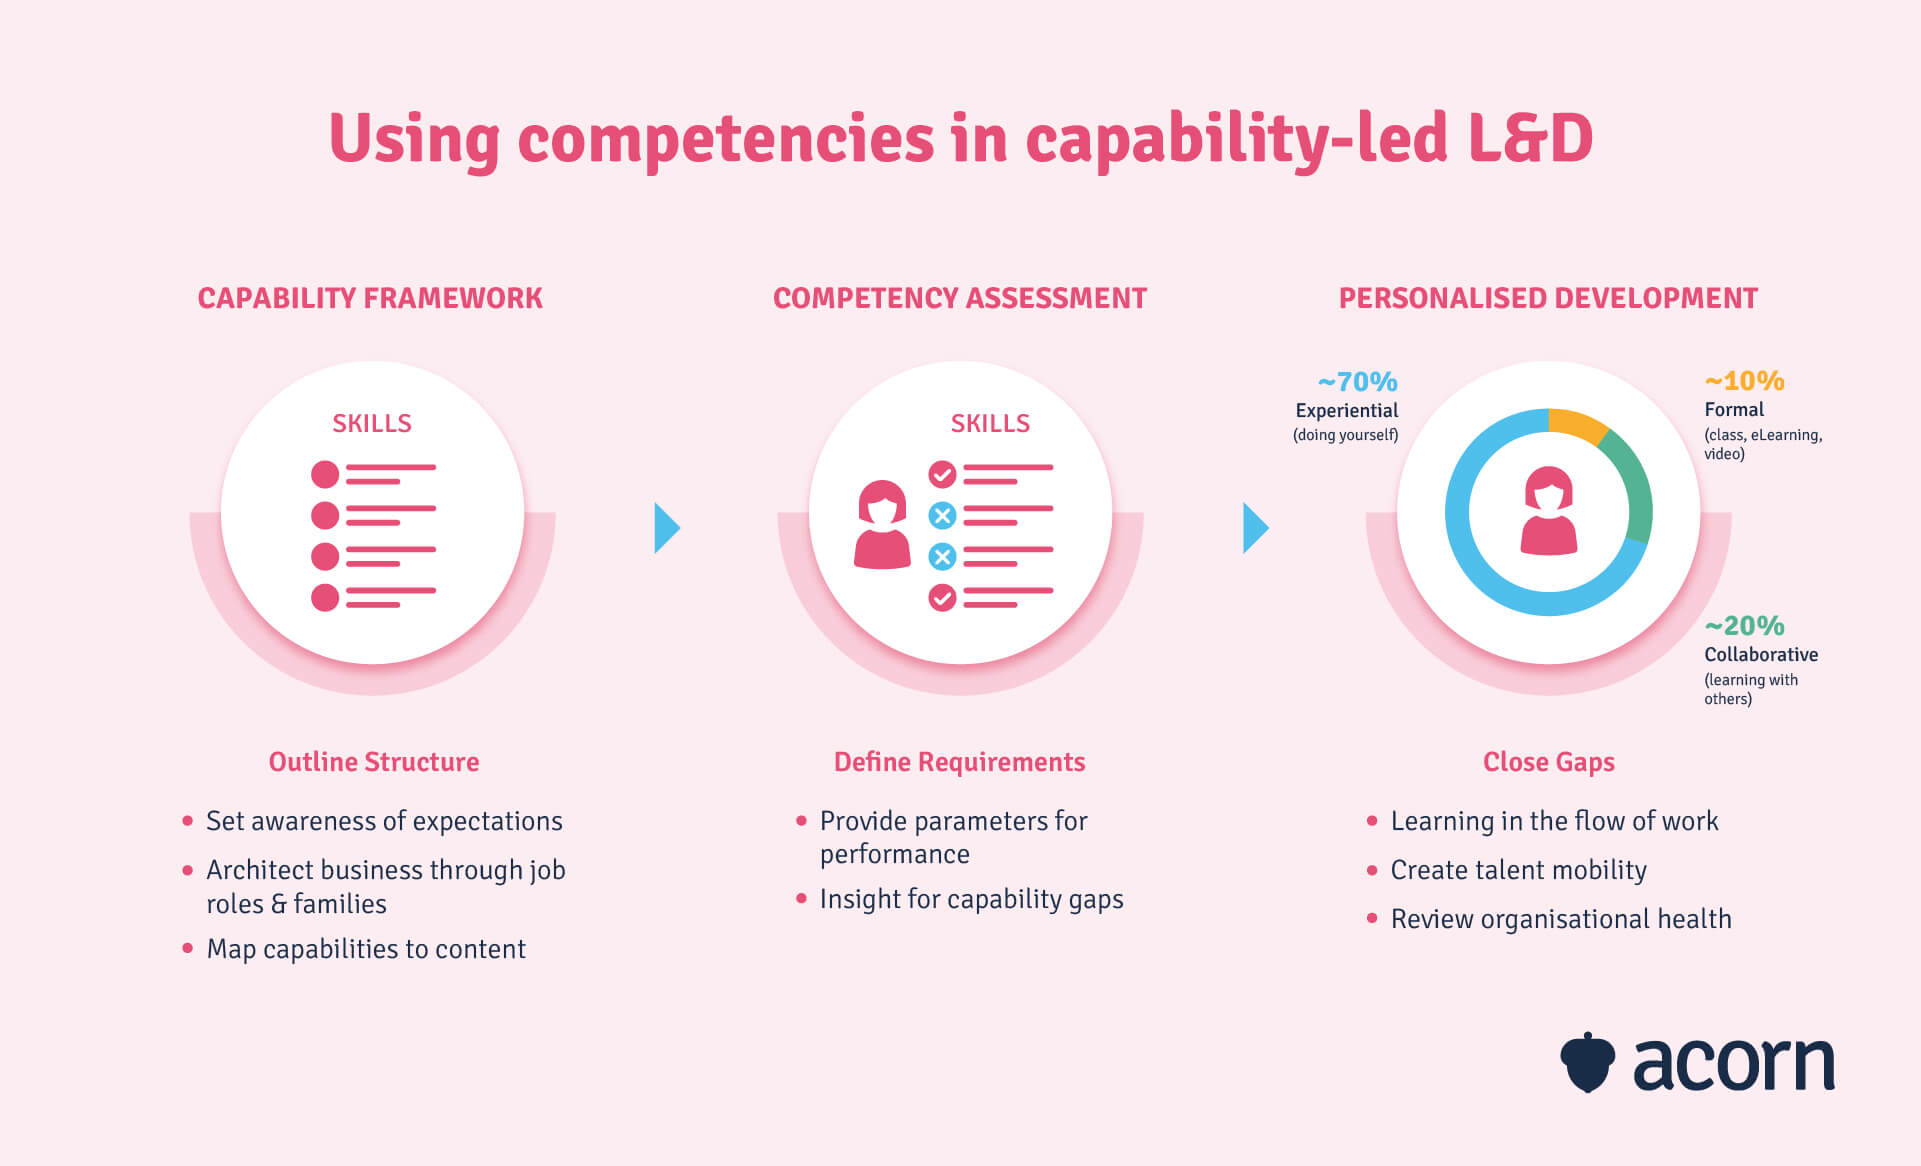 visual display of a step-by-step guide of how to use a competency assessment in capability building